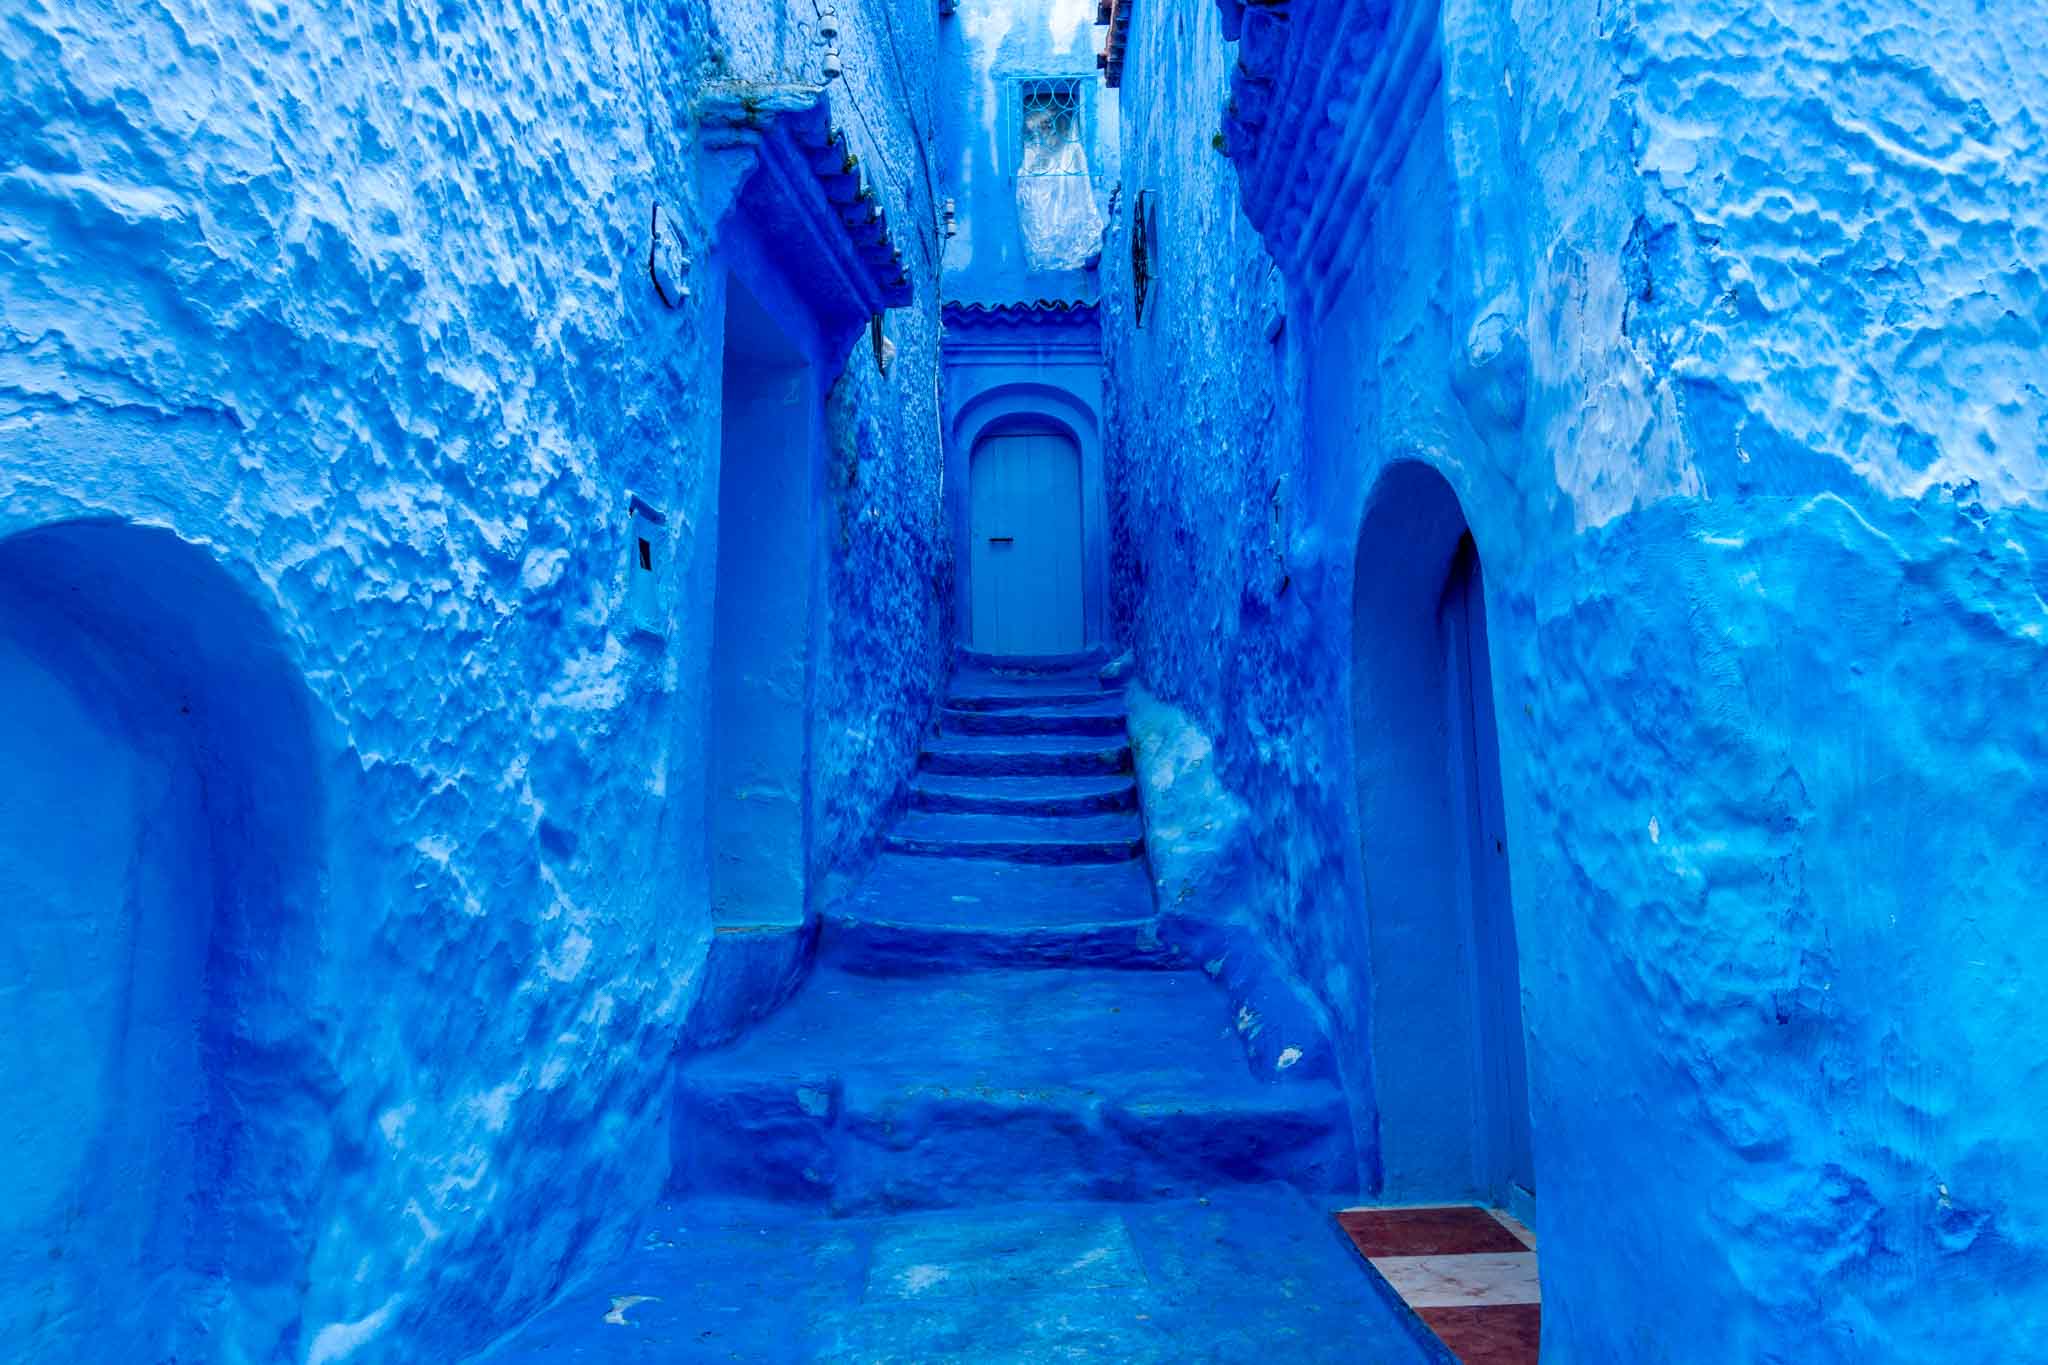 Solid blue passageway in Chefchaouen, Morocco